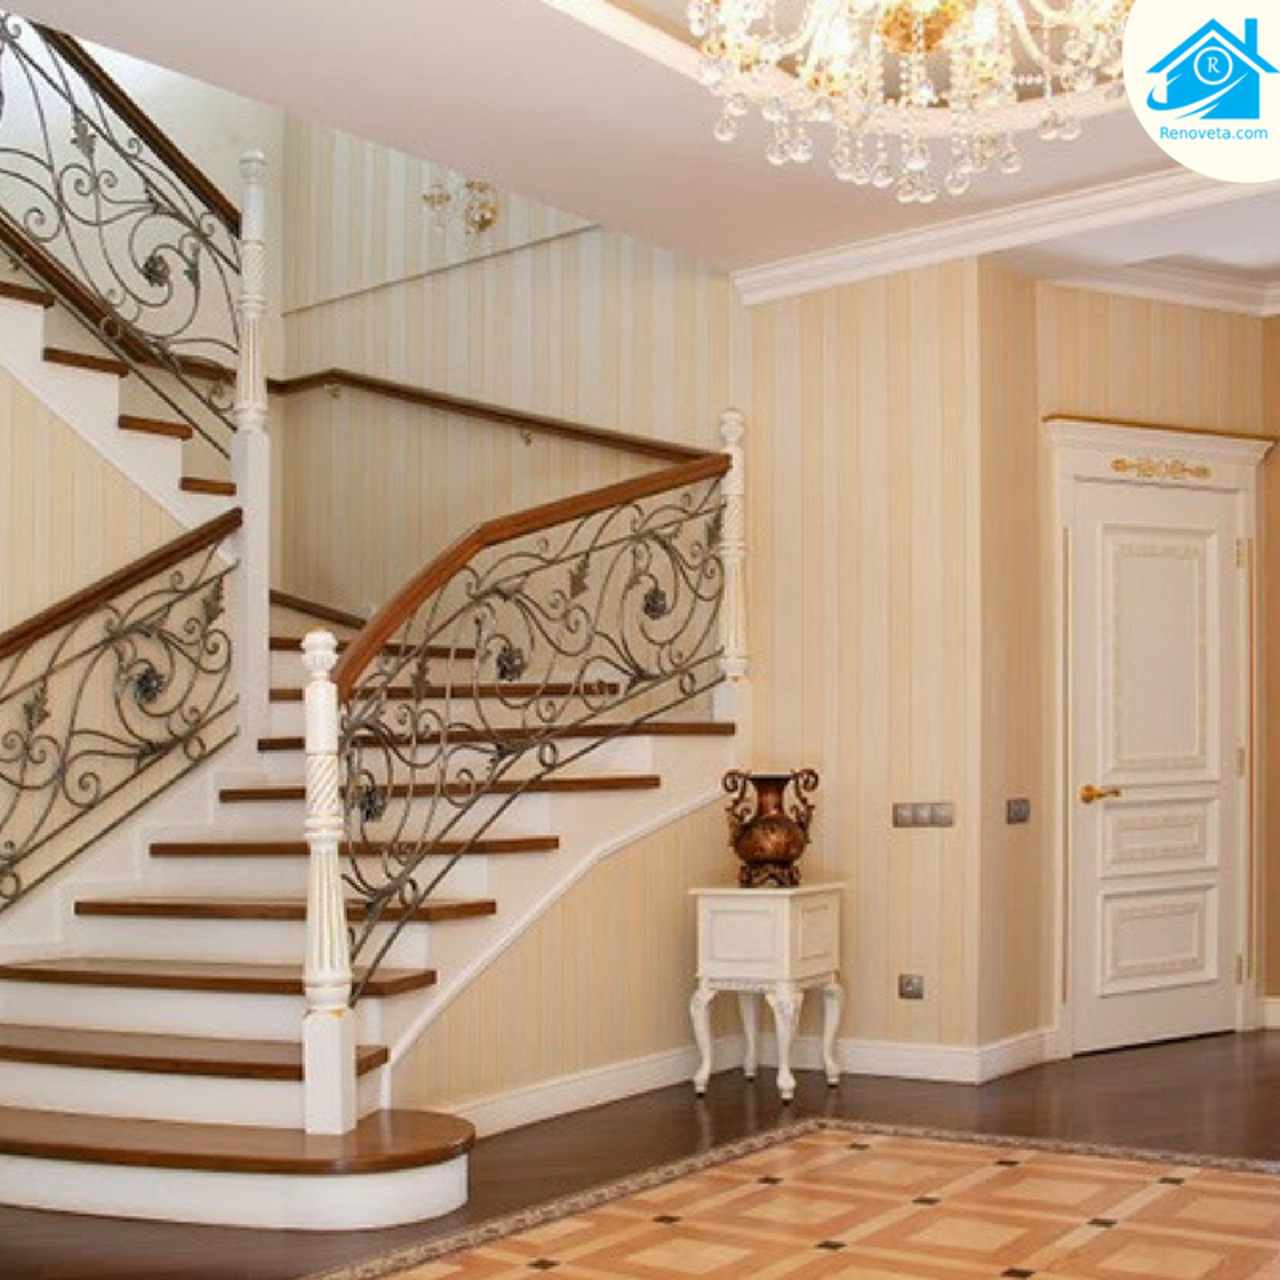 A new #staircase can stand out and speak volumes about your #lifesyle! @DecorBlogger @Rang_Decor @MySterlingDecor https://t.co/mn1q54abCr